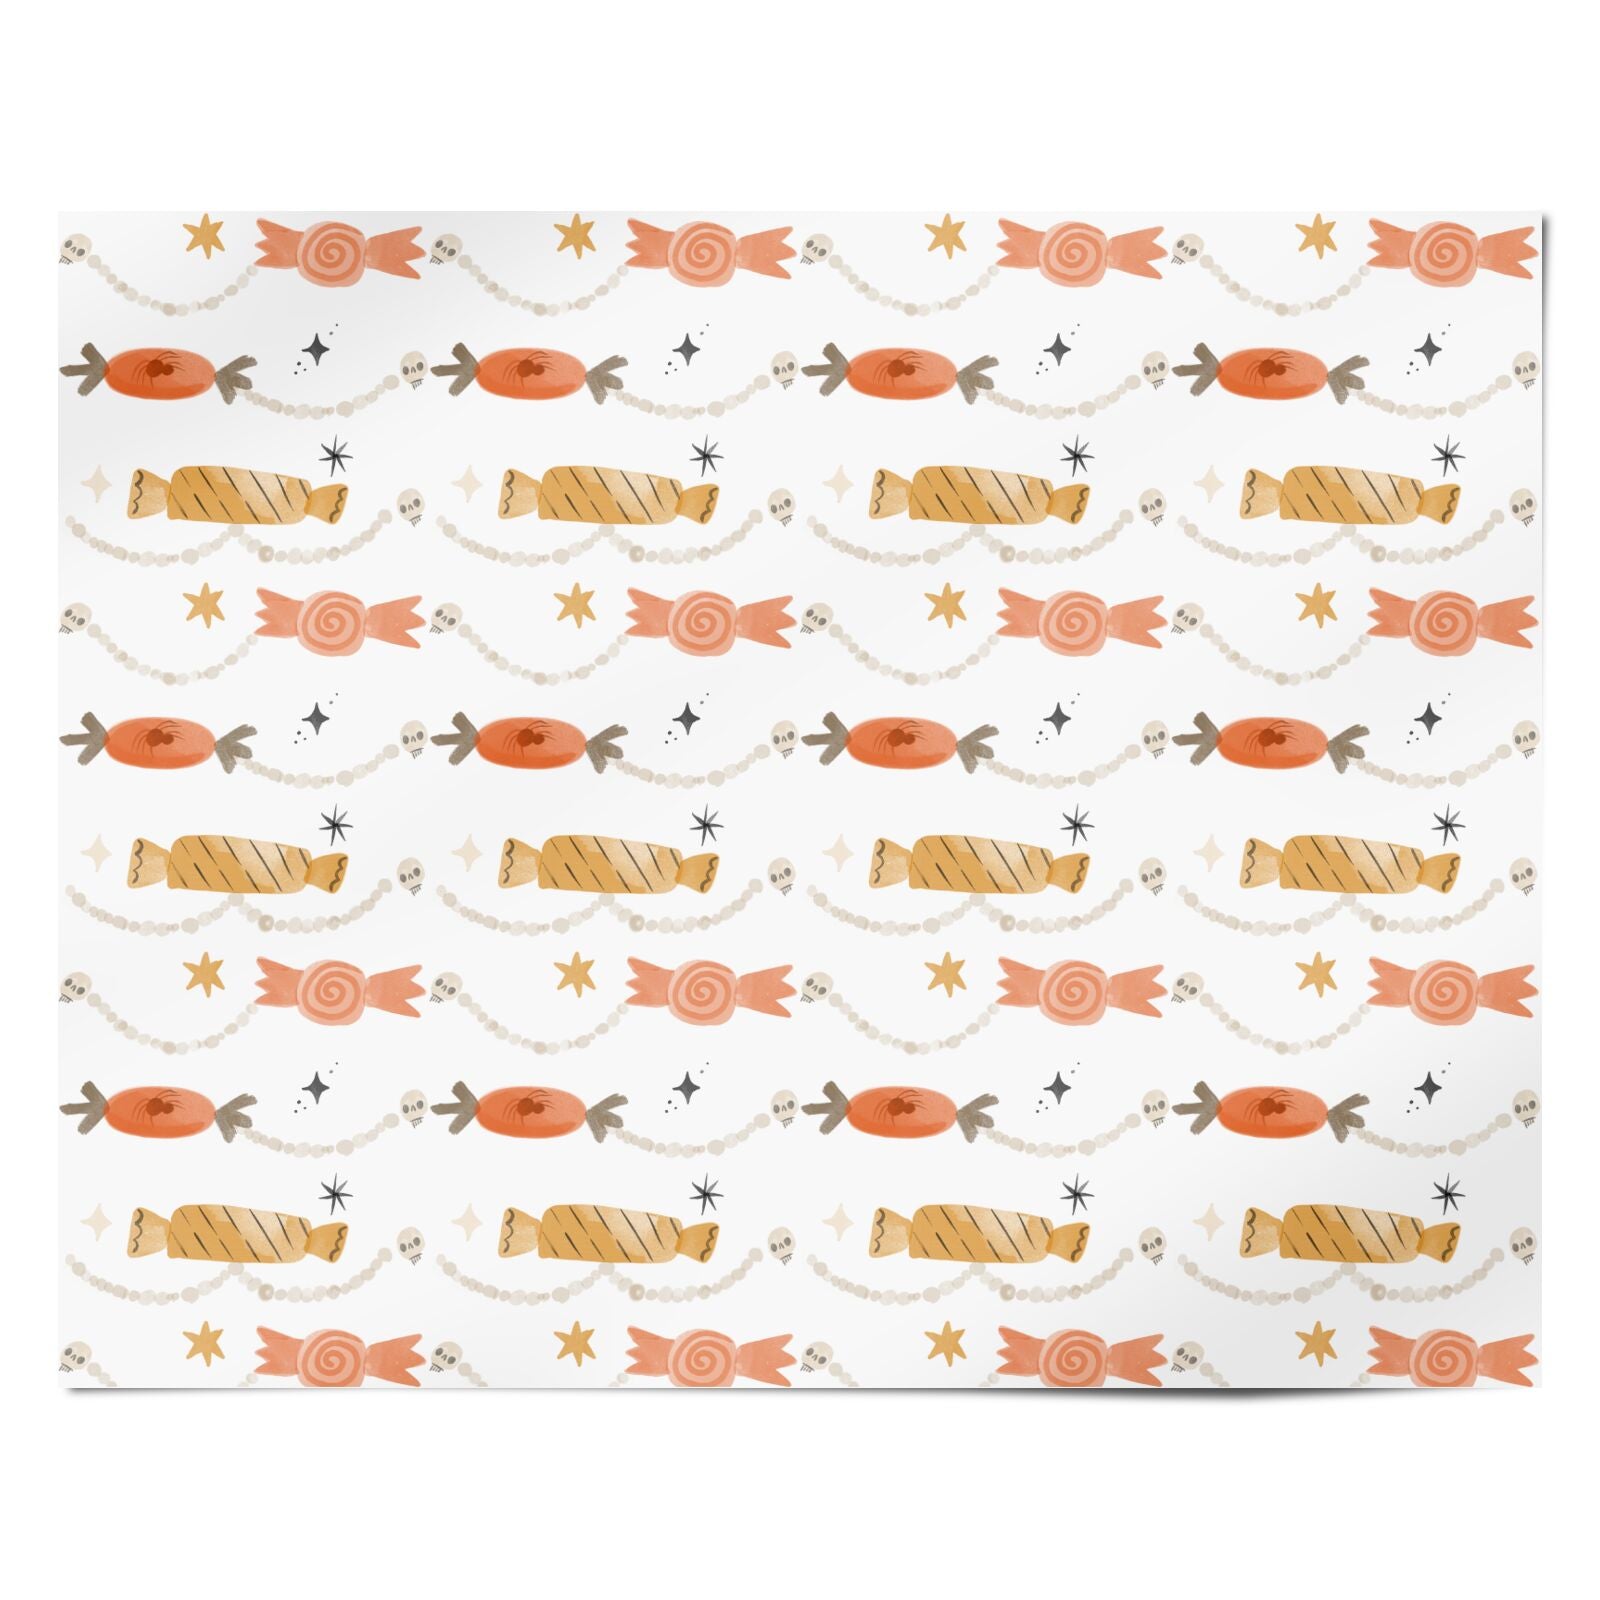 Sweet Decorations Halloween Personalised Wrapping Paper Alternative